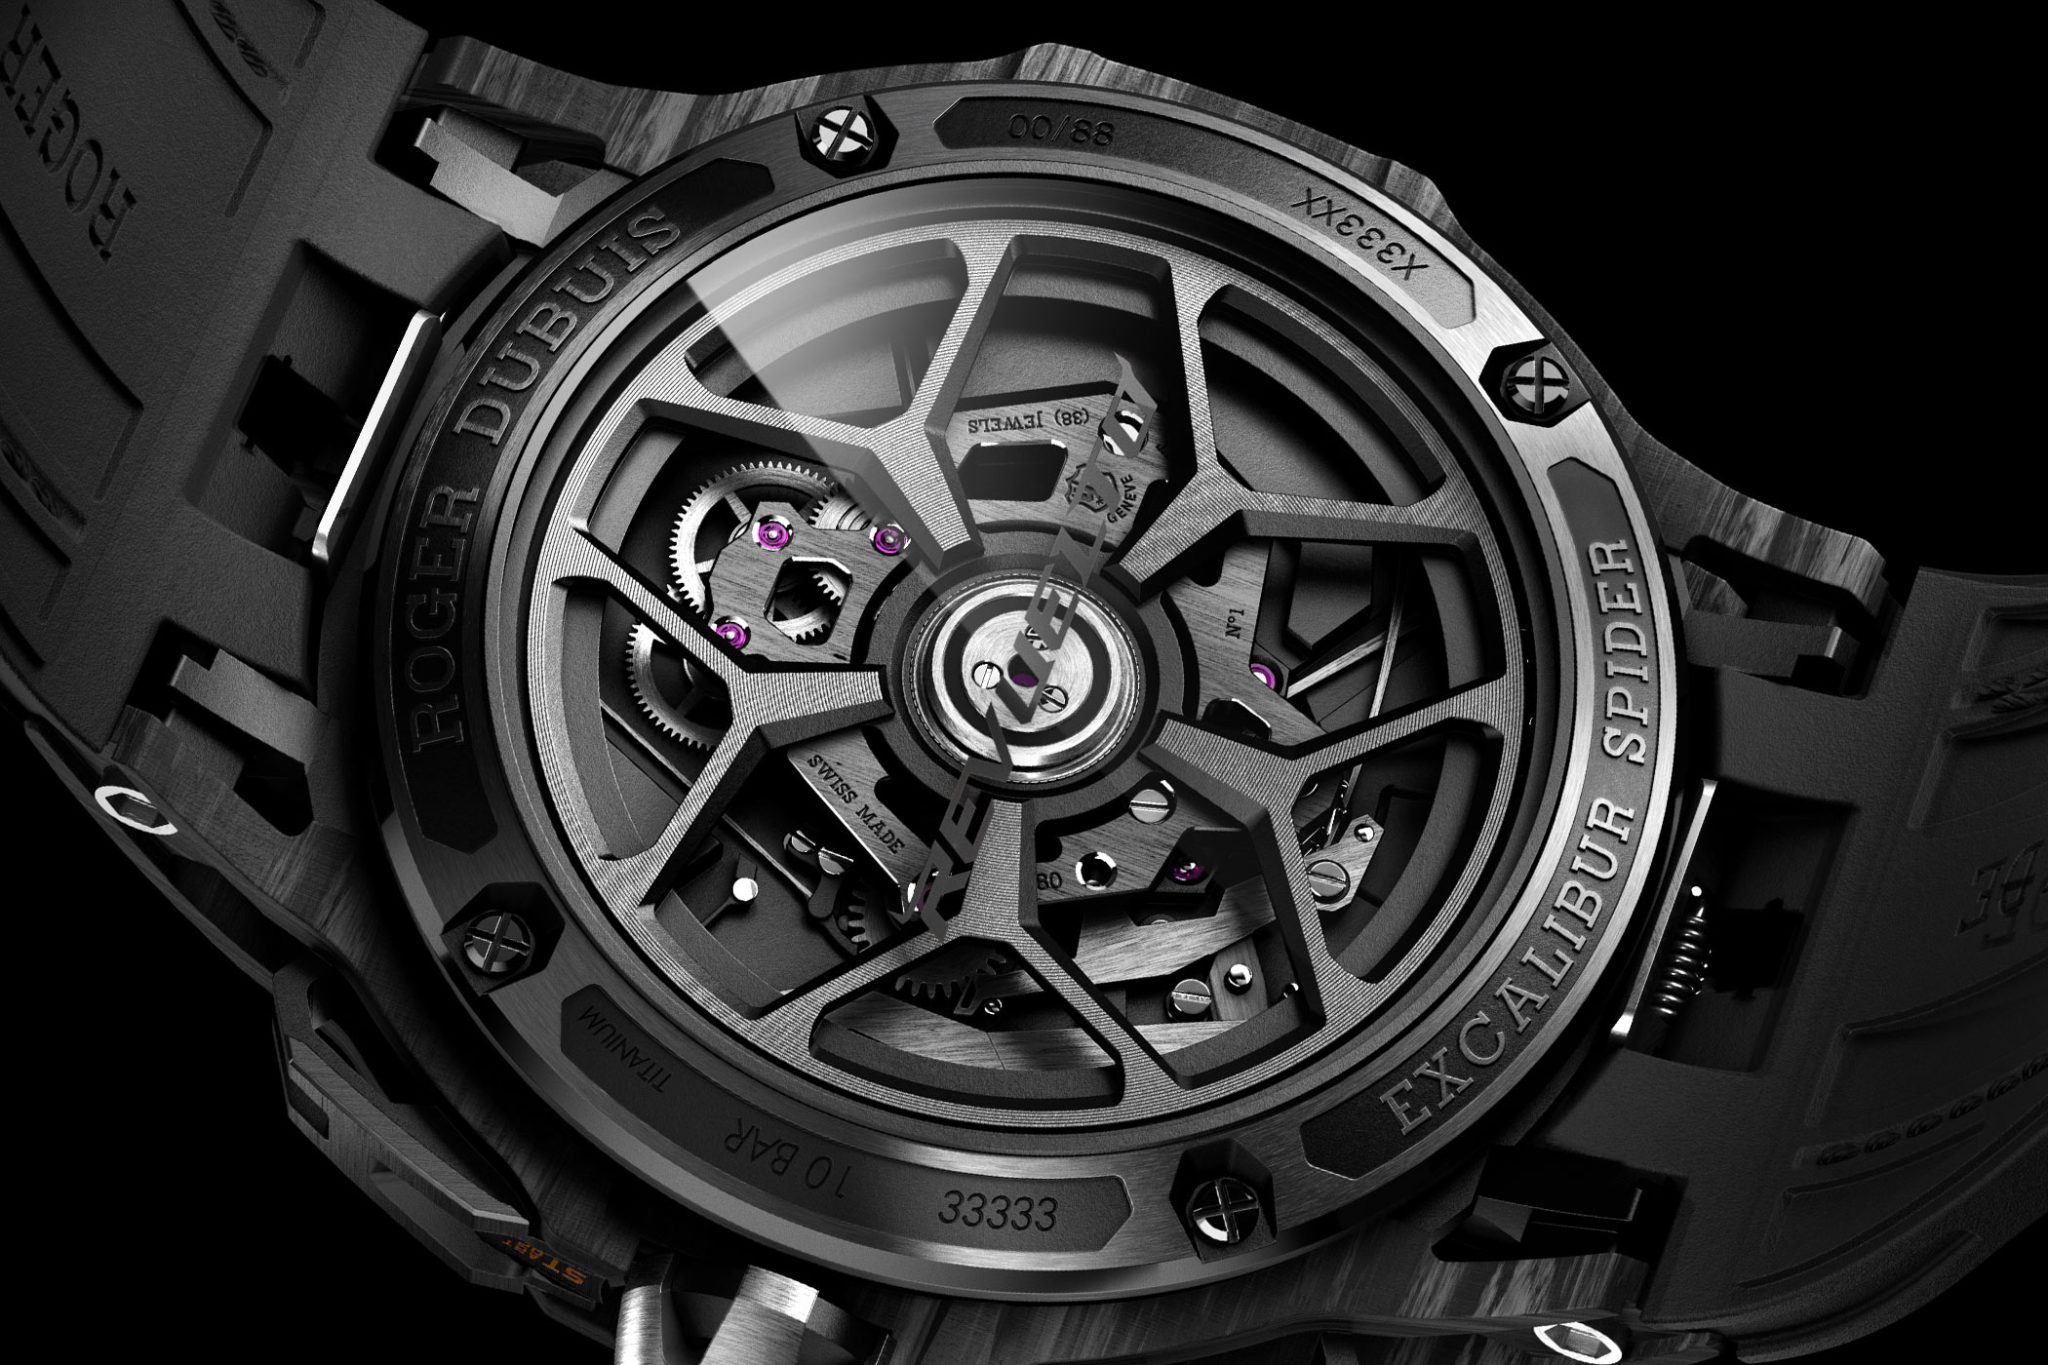 Roger-Dubuis-Excalibur-Spider-Flyback-Chronograph-Revuelto-RDDBEX1045-Rueckseite